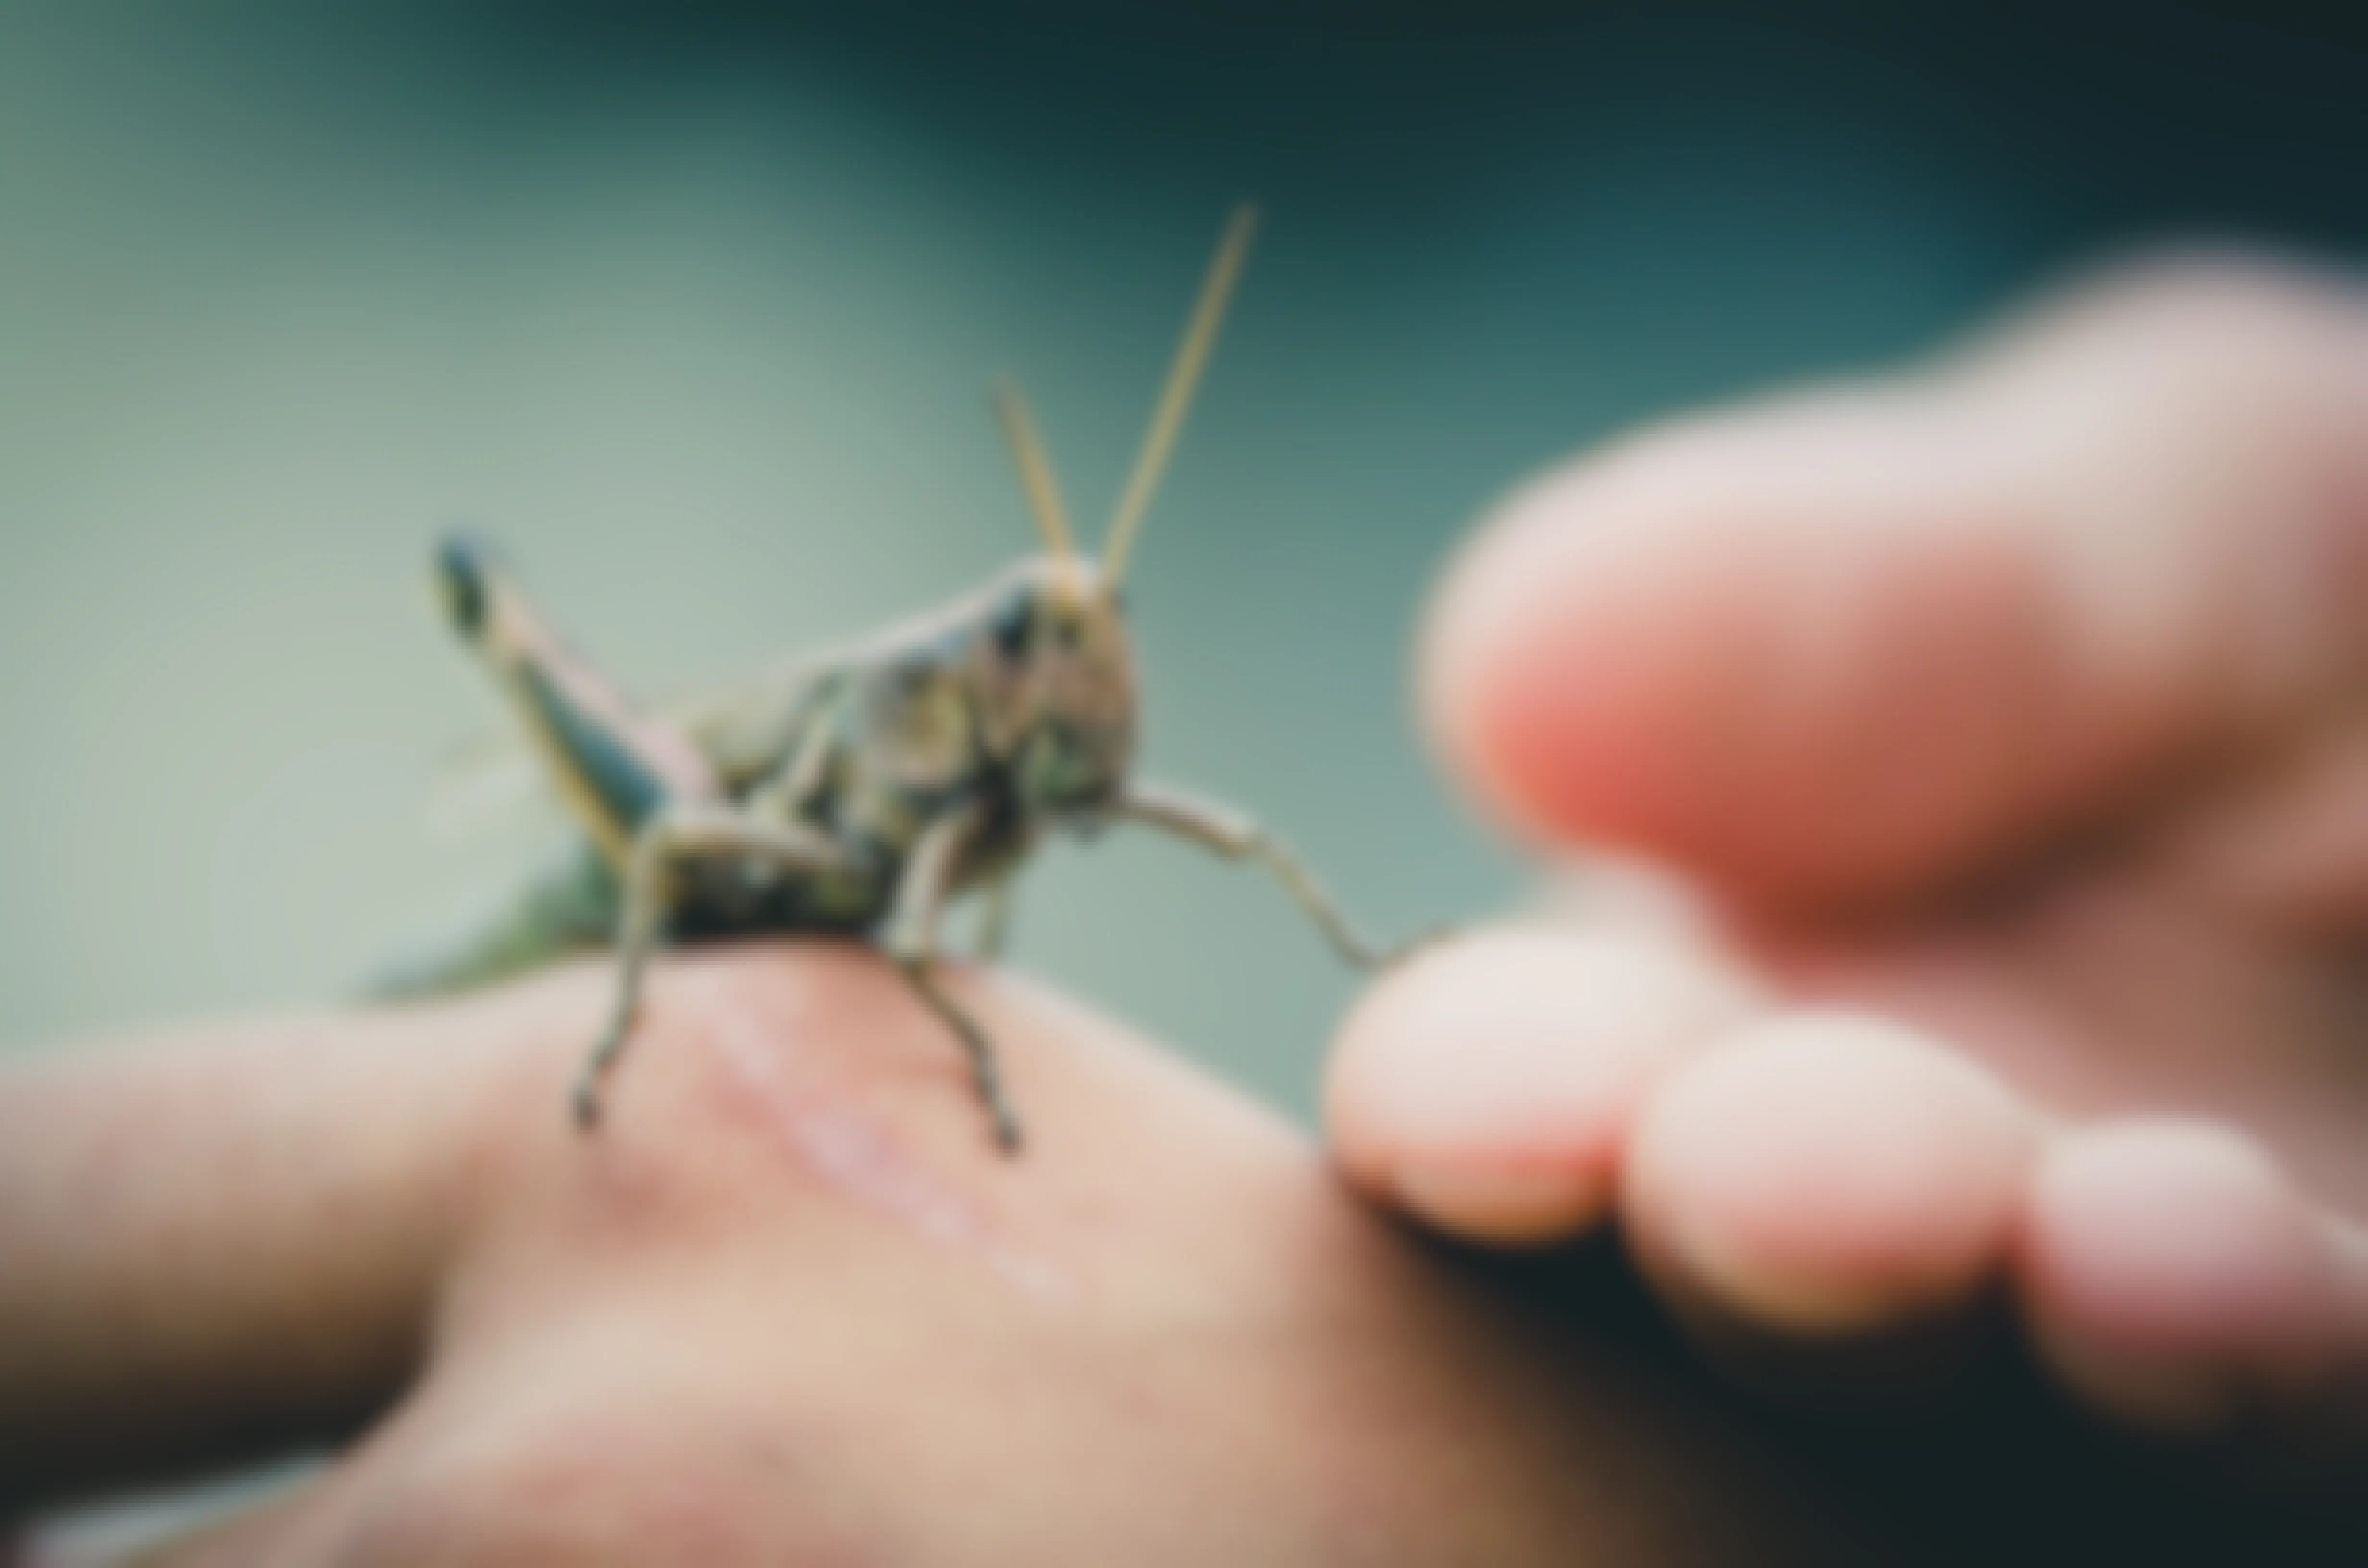 Cricket insect sitting on a persons hand